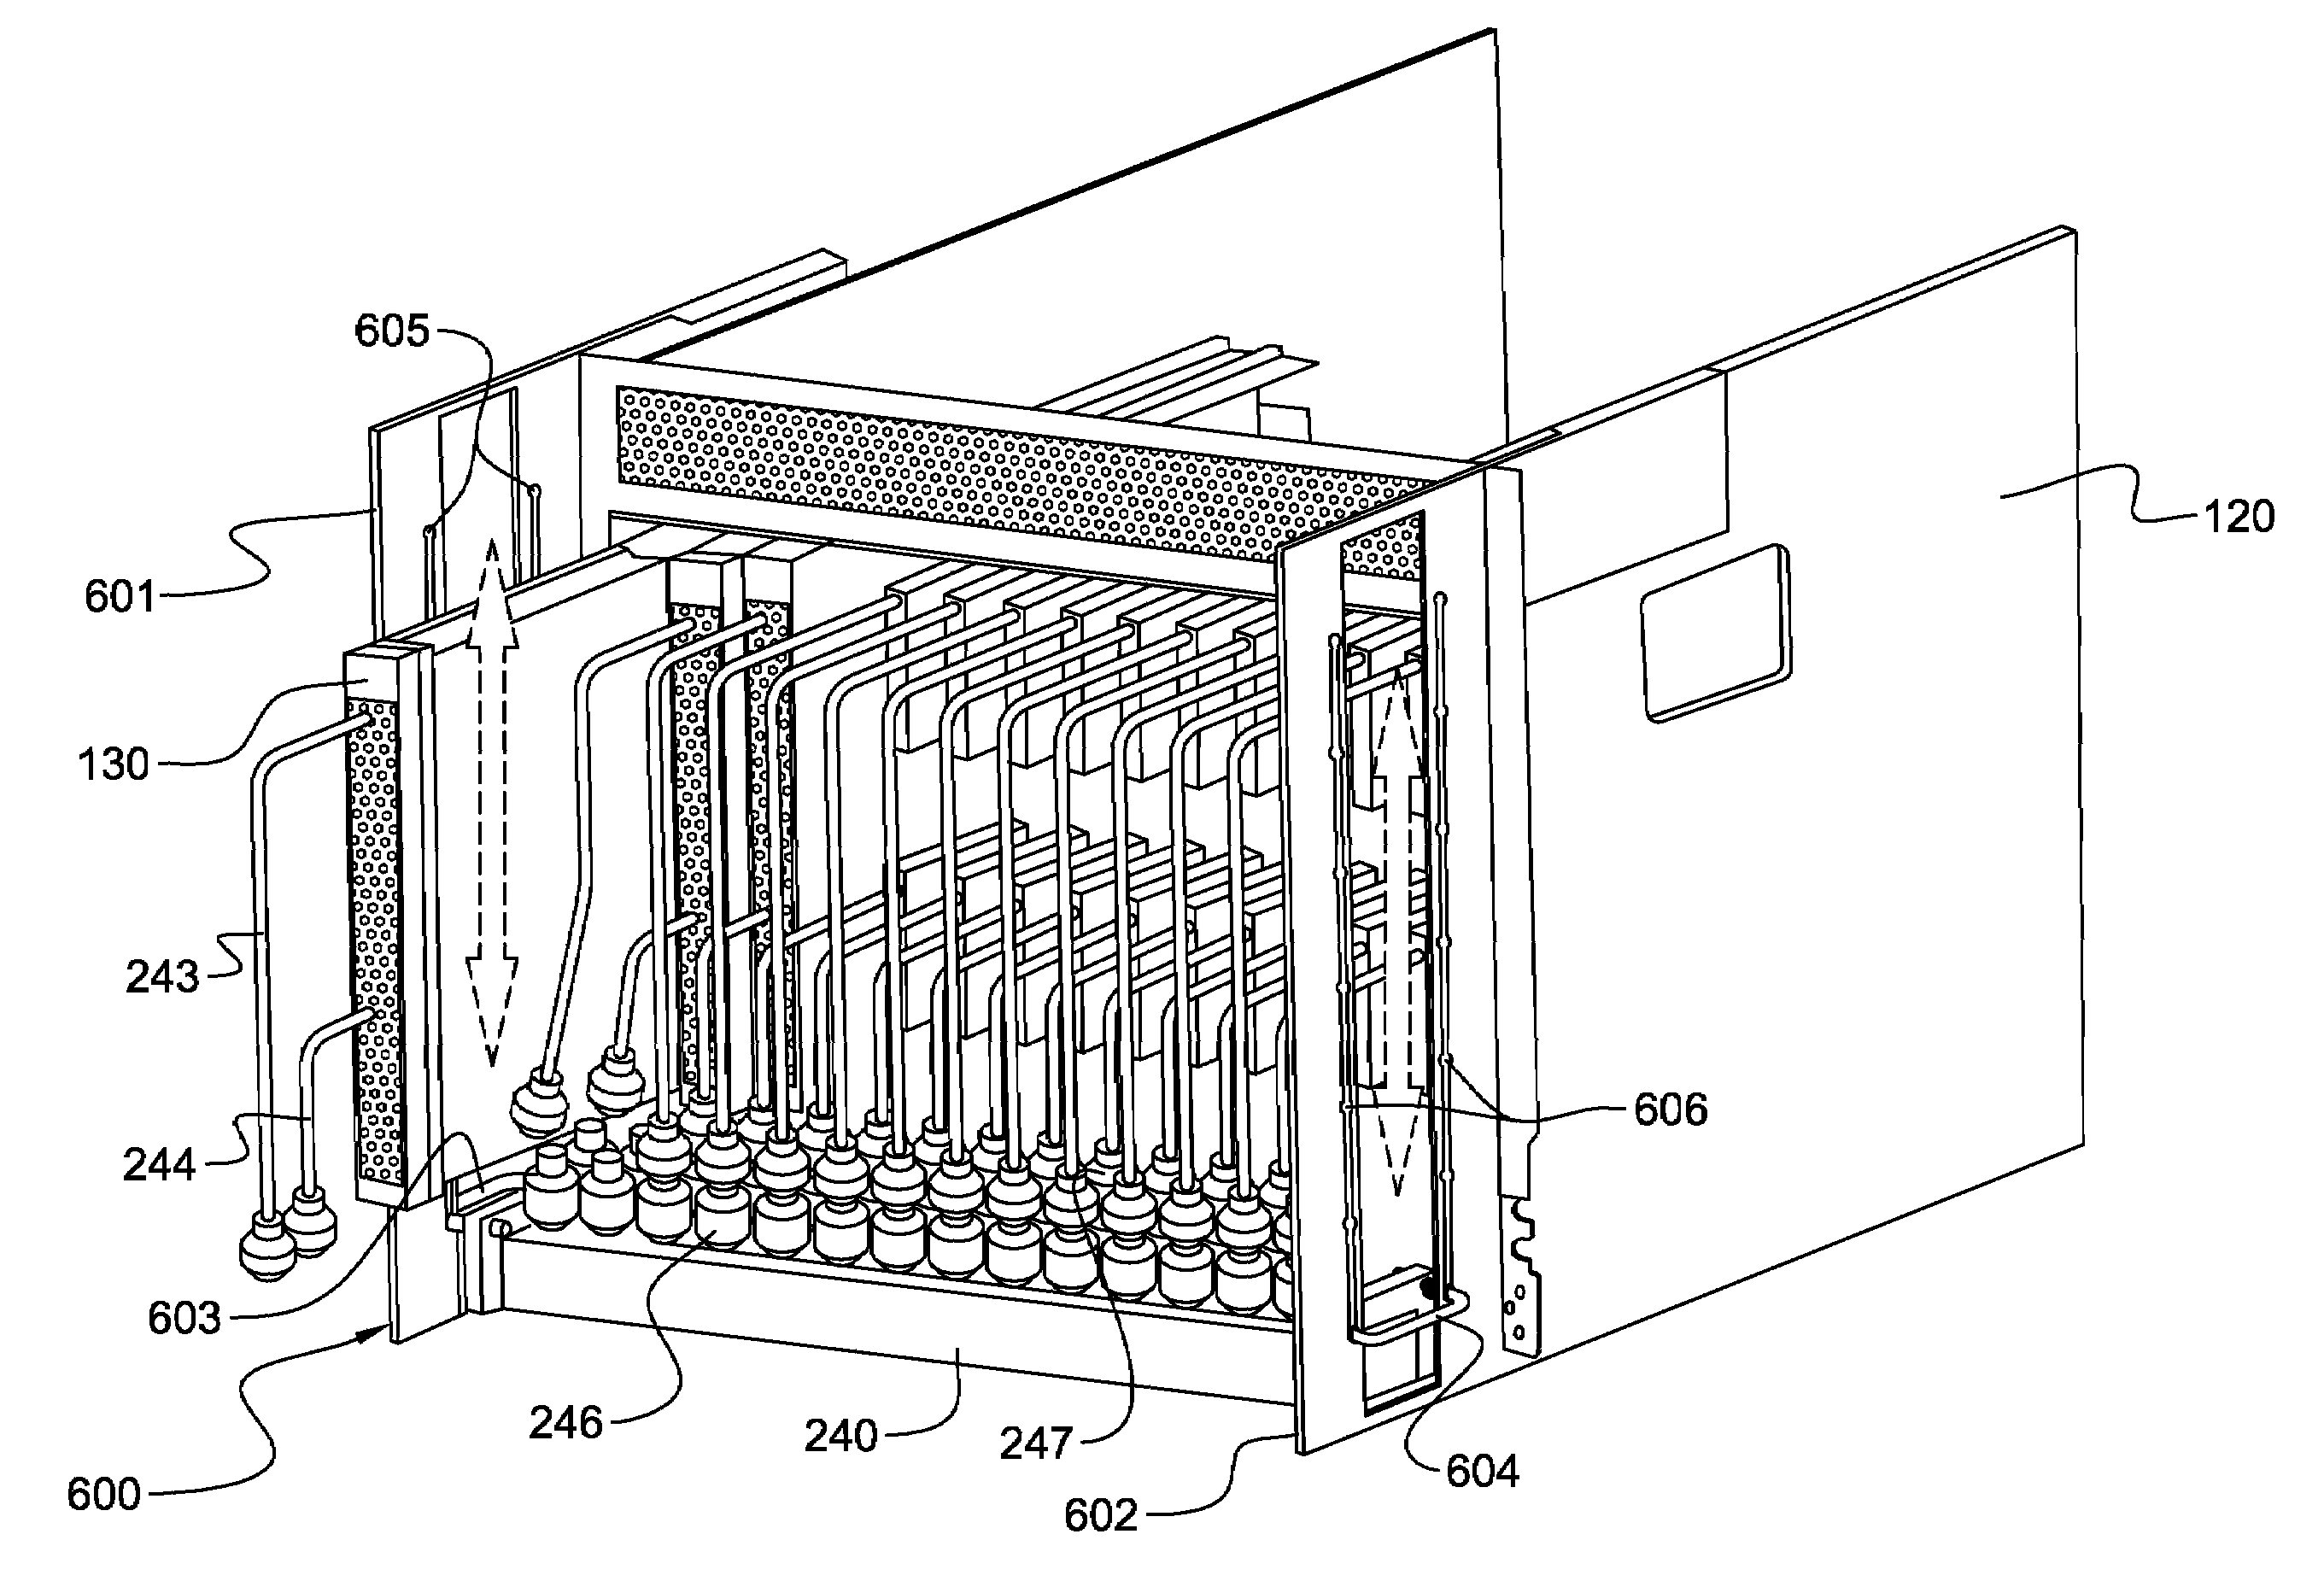 Liquid cooling apparatus and method for facilitating cooling of an electronics system